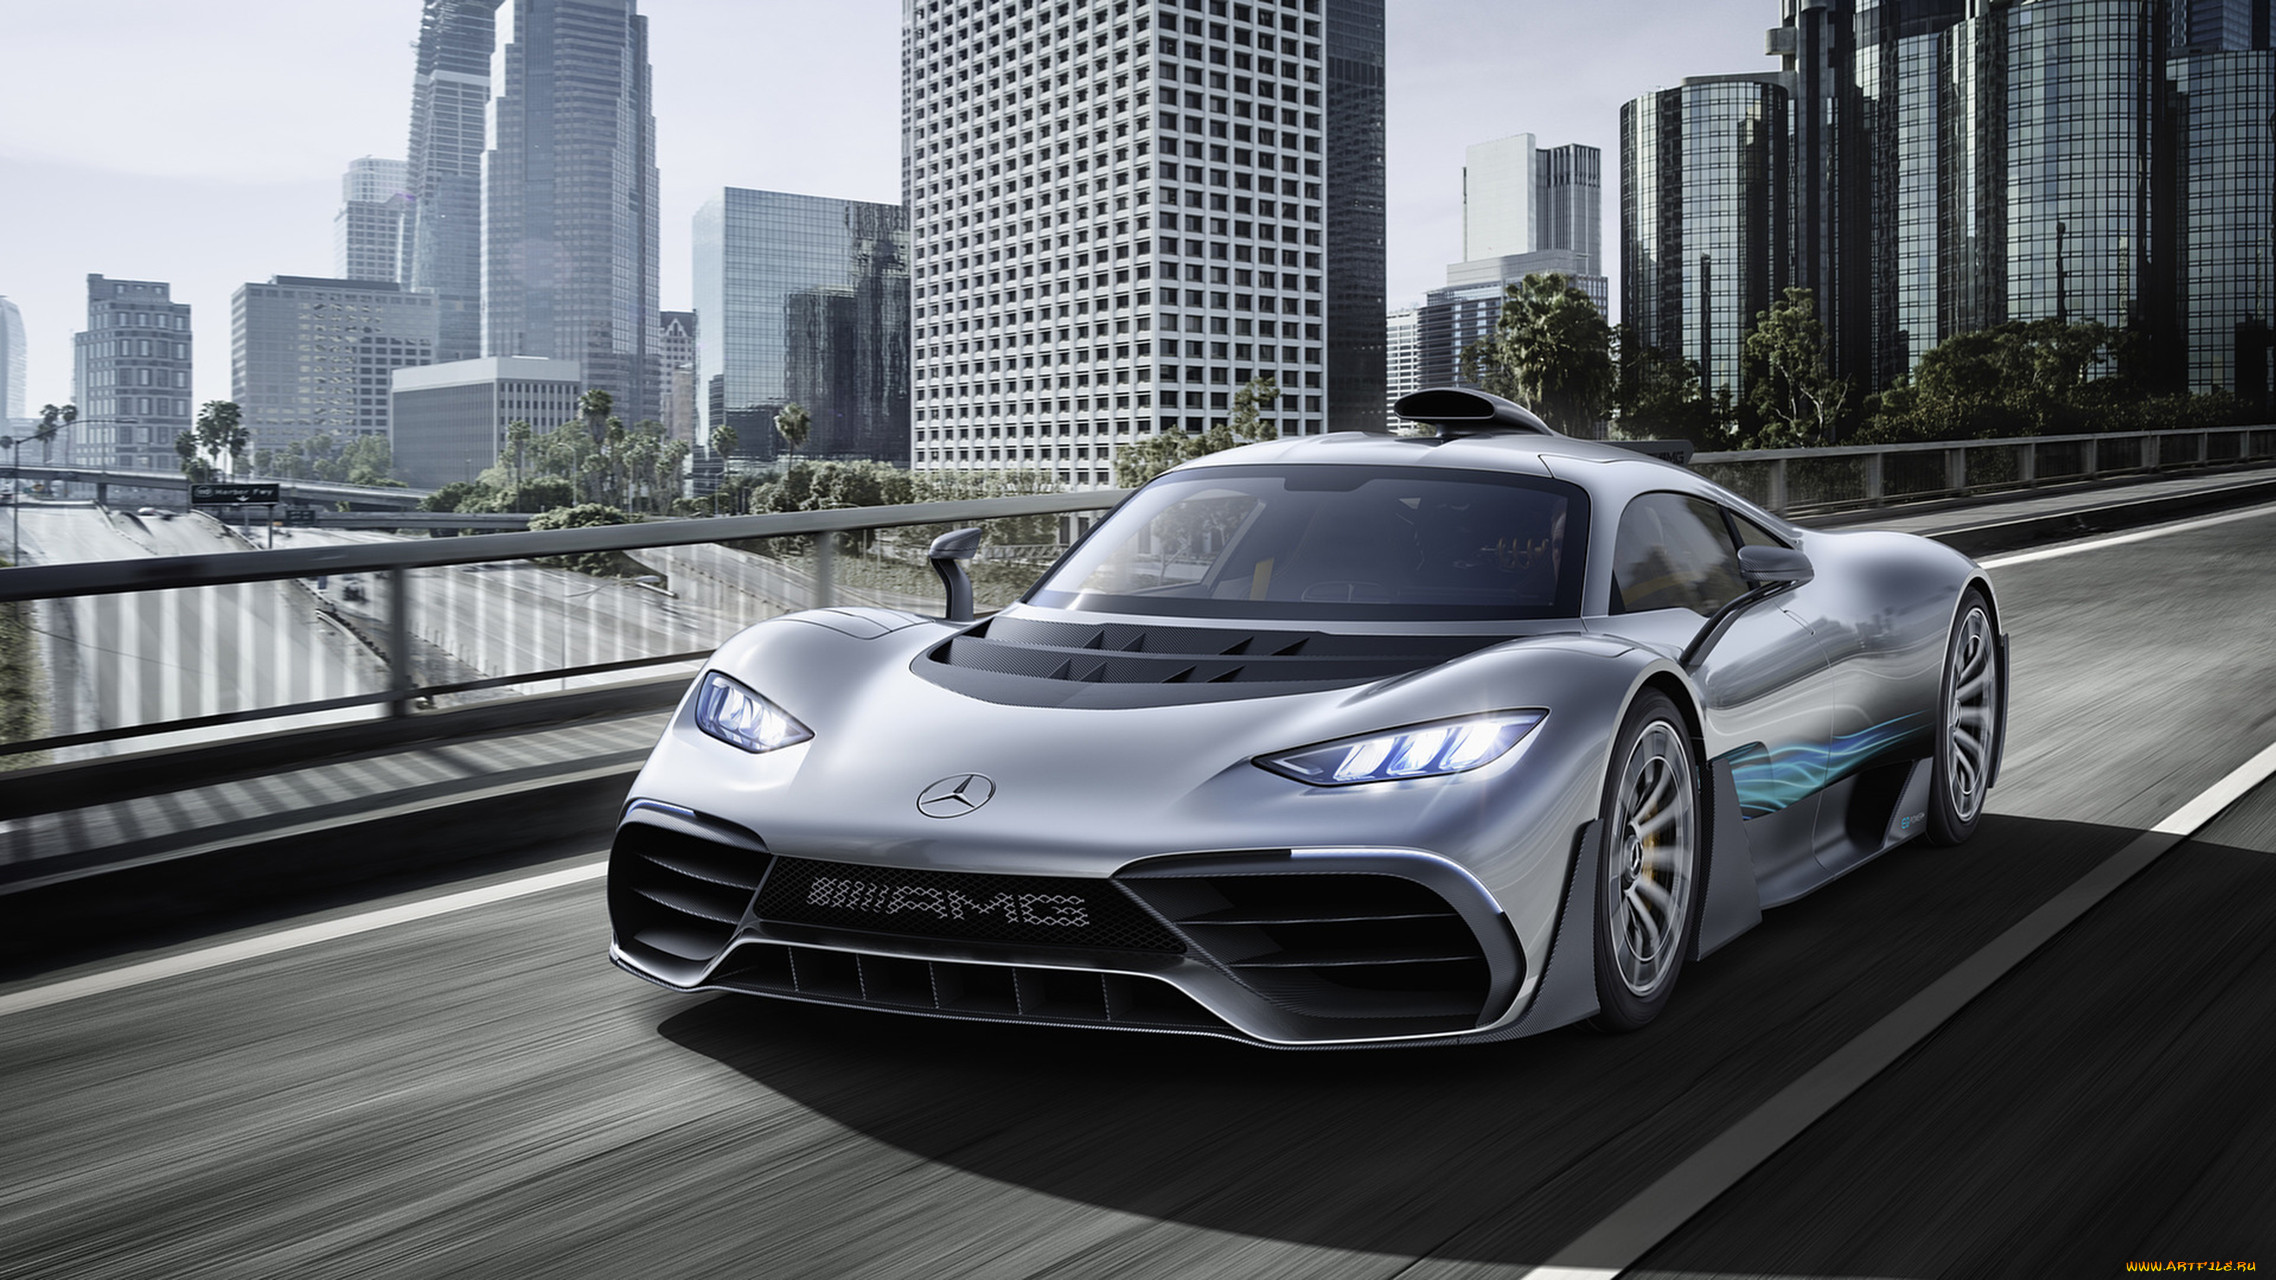 mercedes-benz amg project one 2017, , mercedes-benz, one, project, amg, 2017